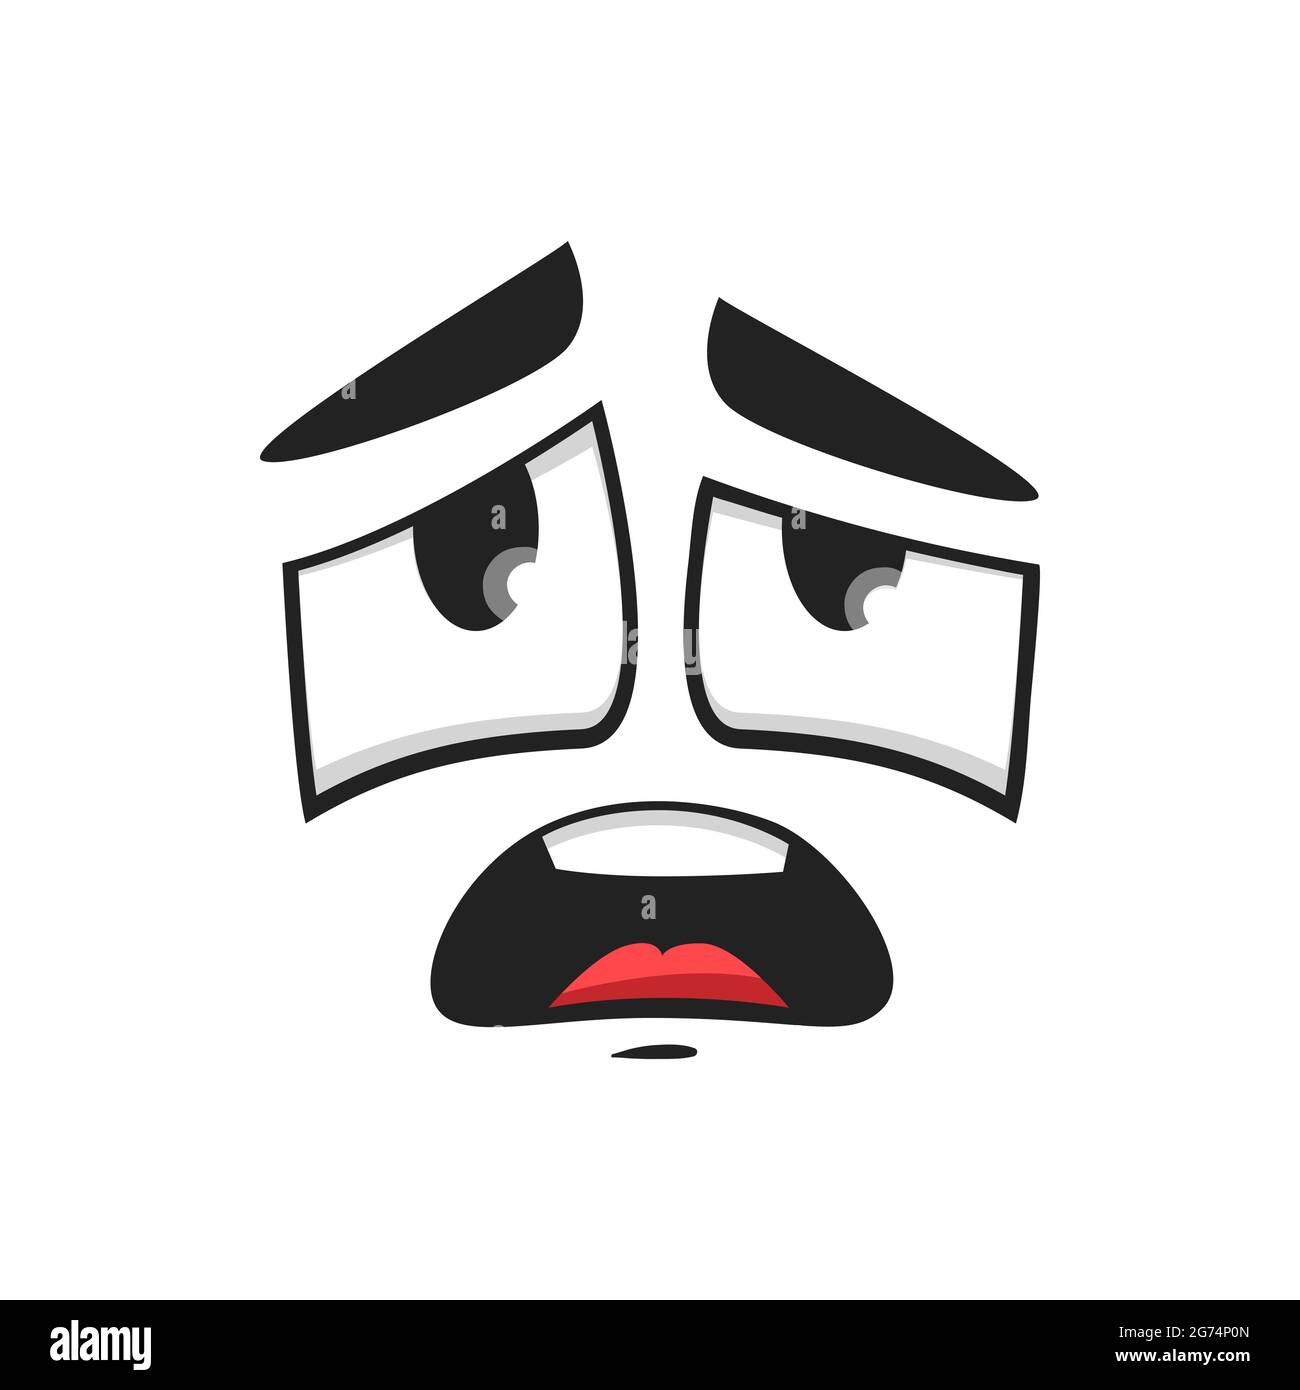 Cartoon face vector icon, disappointed or upset emoji, funny facial expression. Unhappy negative feelings, regret, sadness emotion isolated on white b Stock Vector